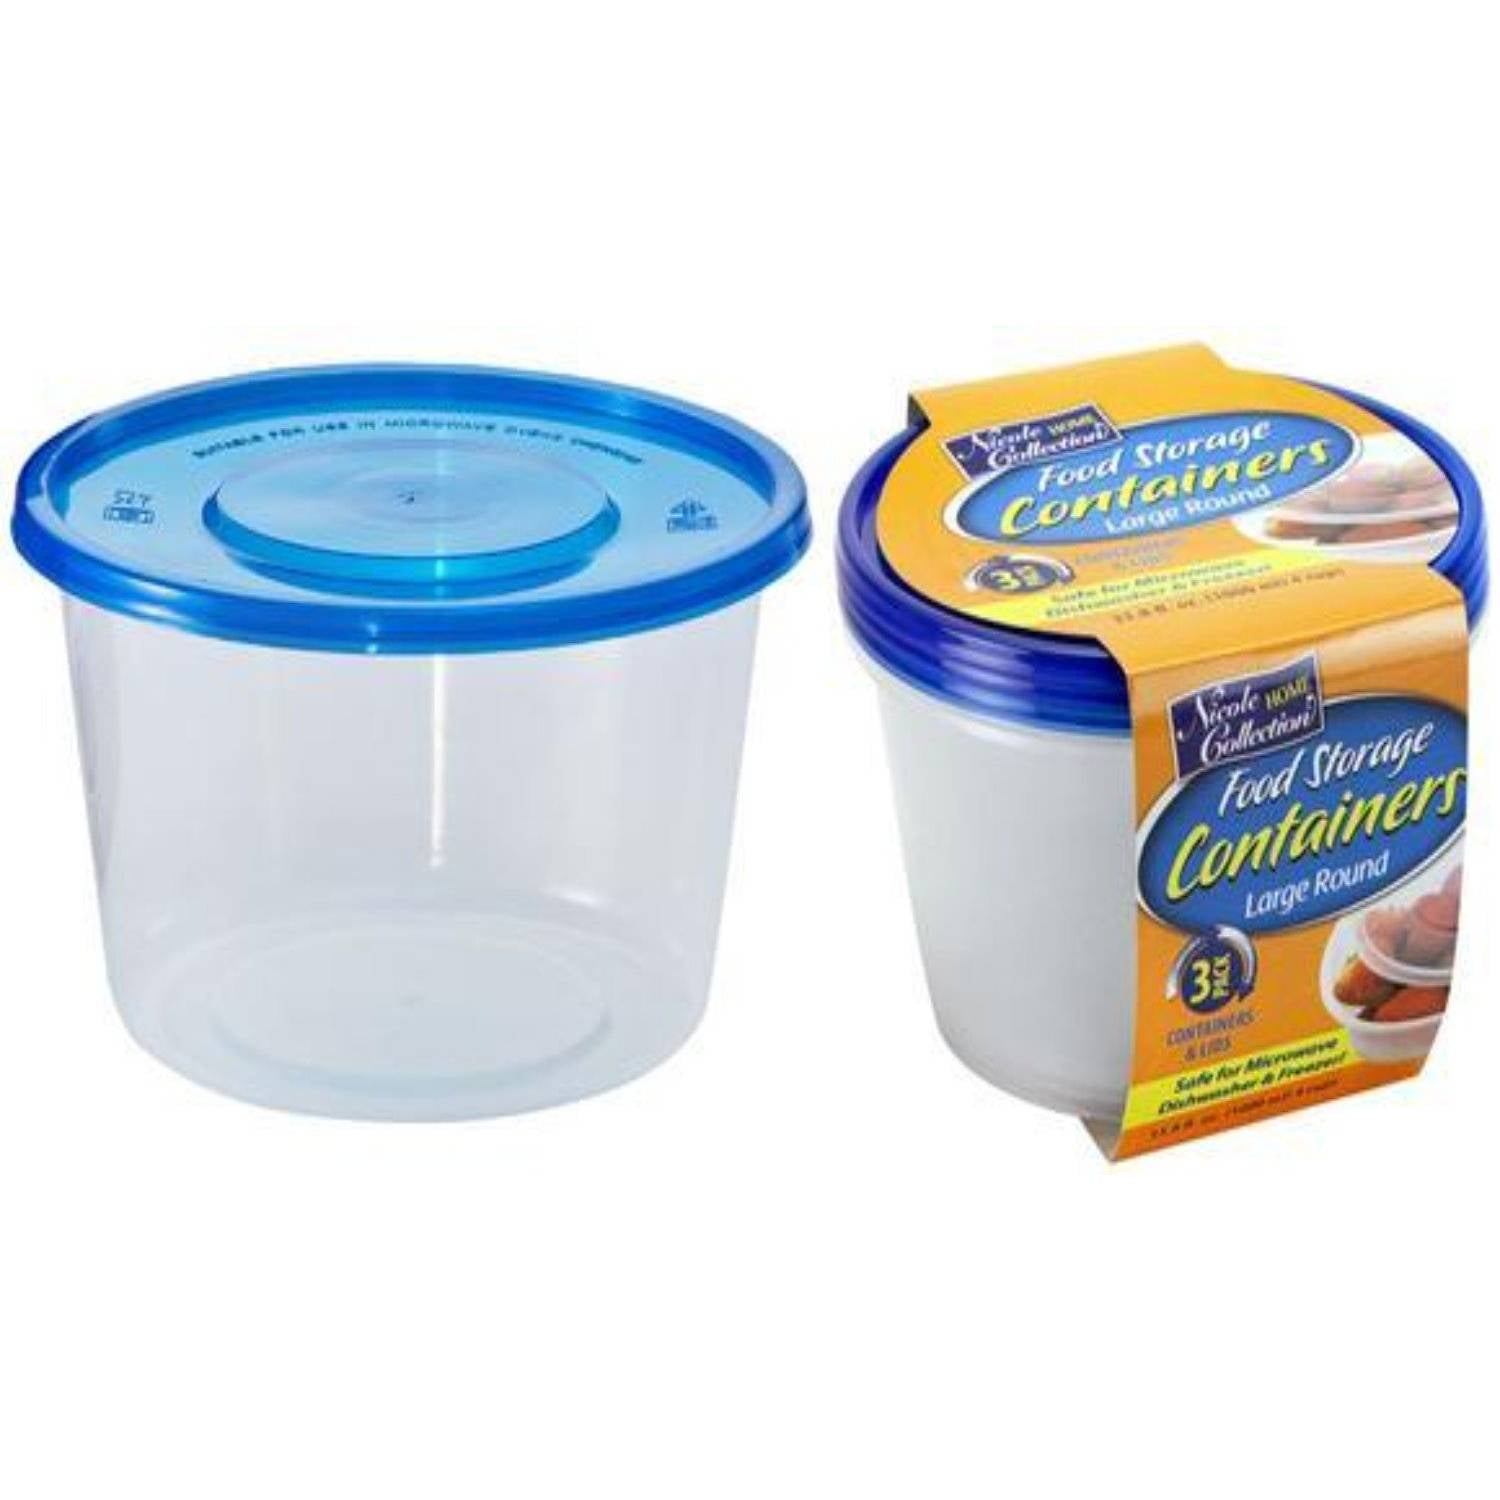 Nicole Home Collection Containers With Lids Large Round Blue 34 oz Food Storage & Serving Nicole Collection   